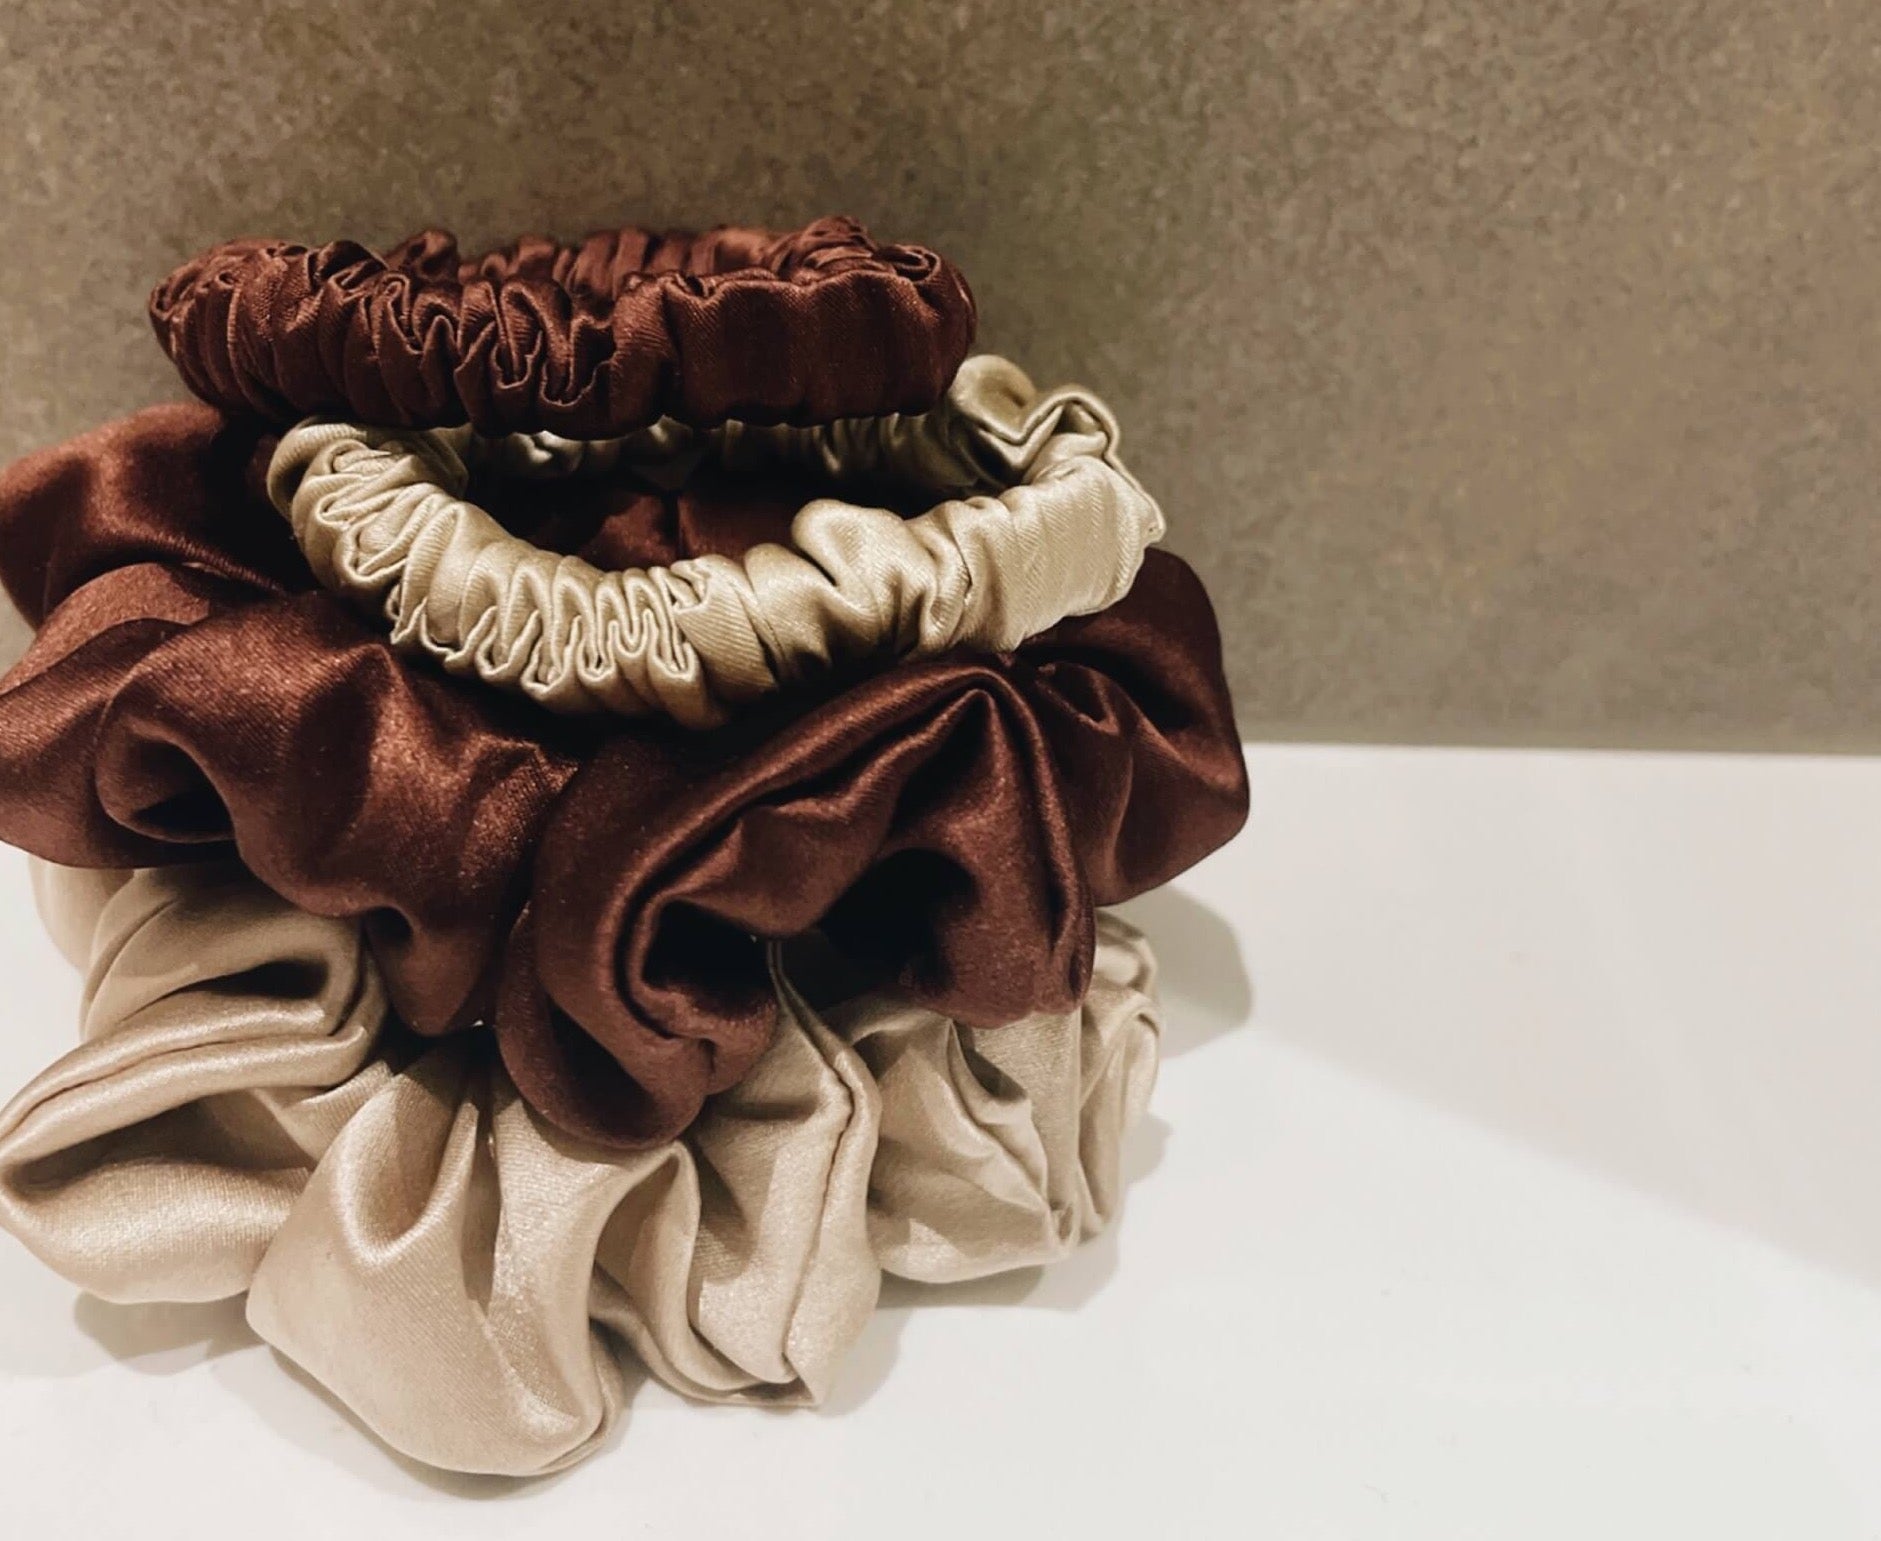 How to Restore Accidentally Washed Silk (Silk Washing and Care Tips)